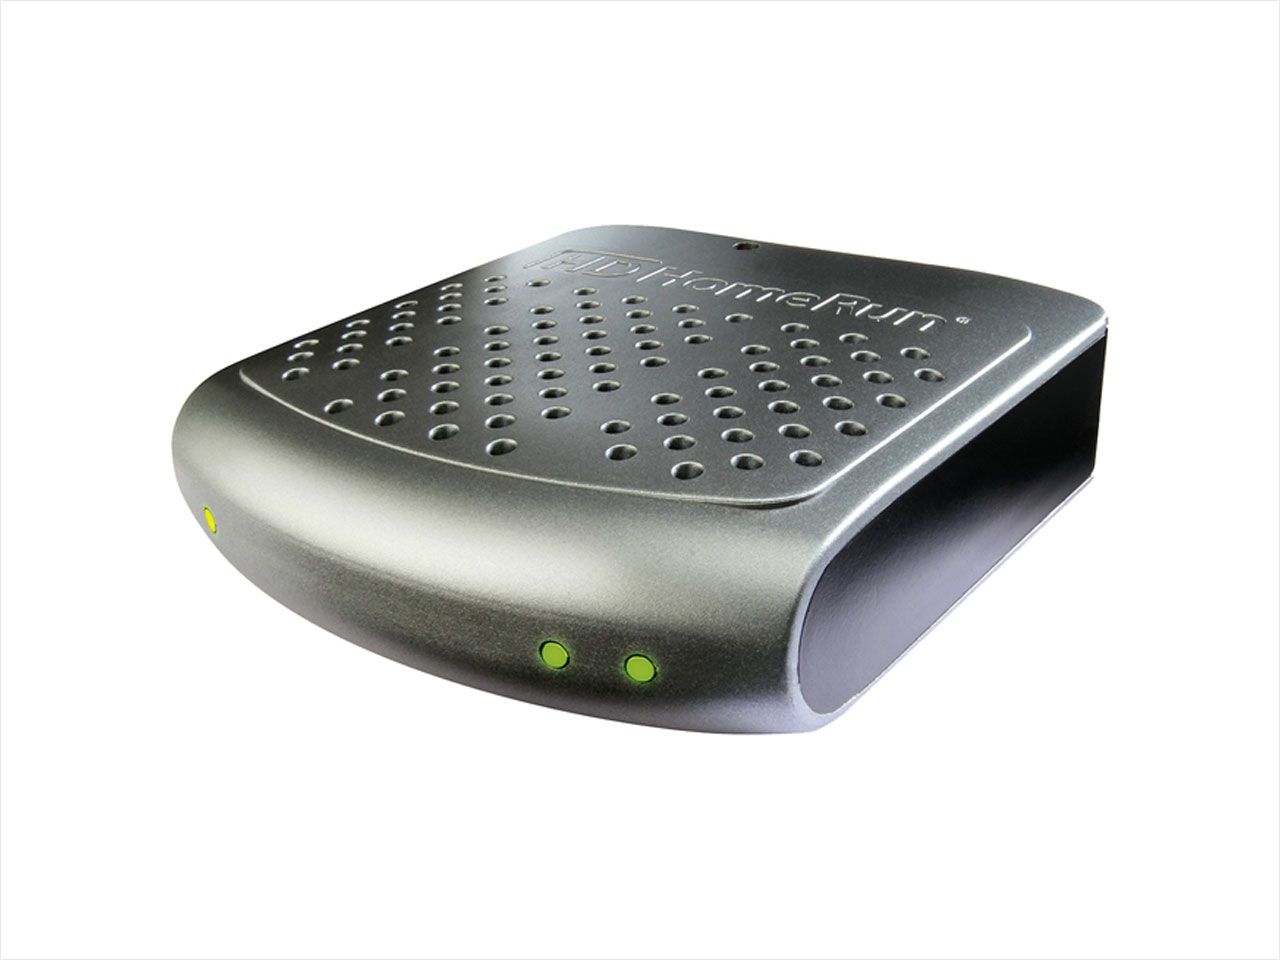 SiliconDust HDHR4-2US HDHomeRun CONNECT 2-Tuner Streaming Media Player(+$5GC) $70@NF